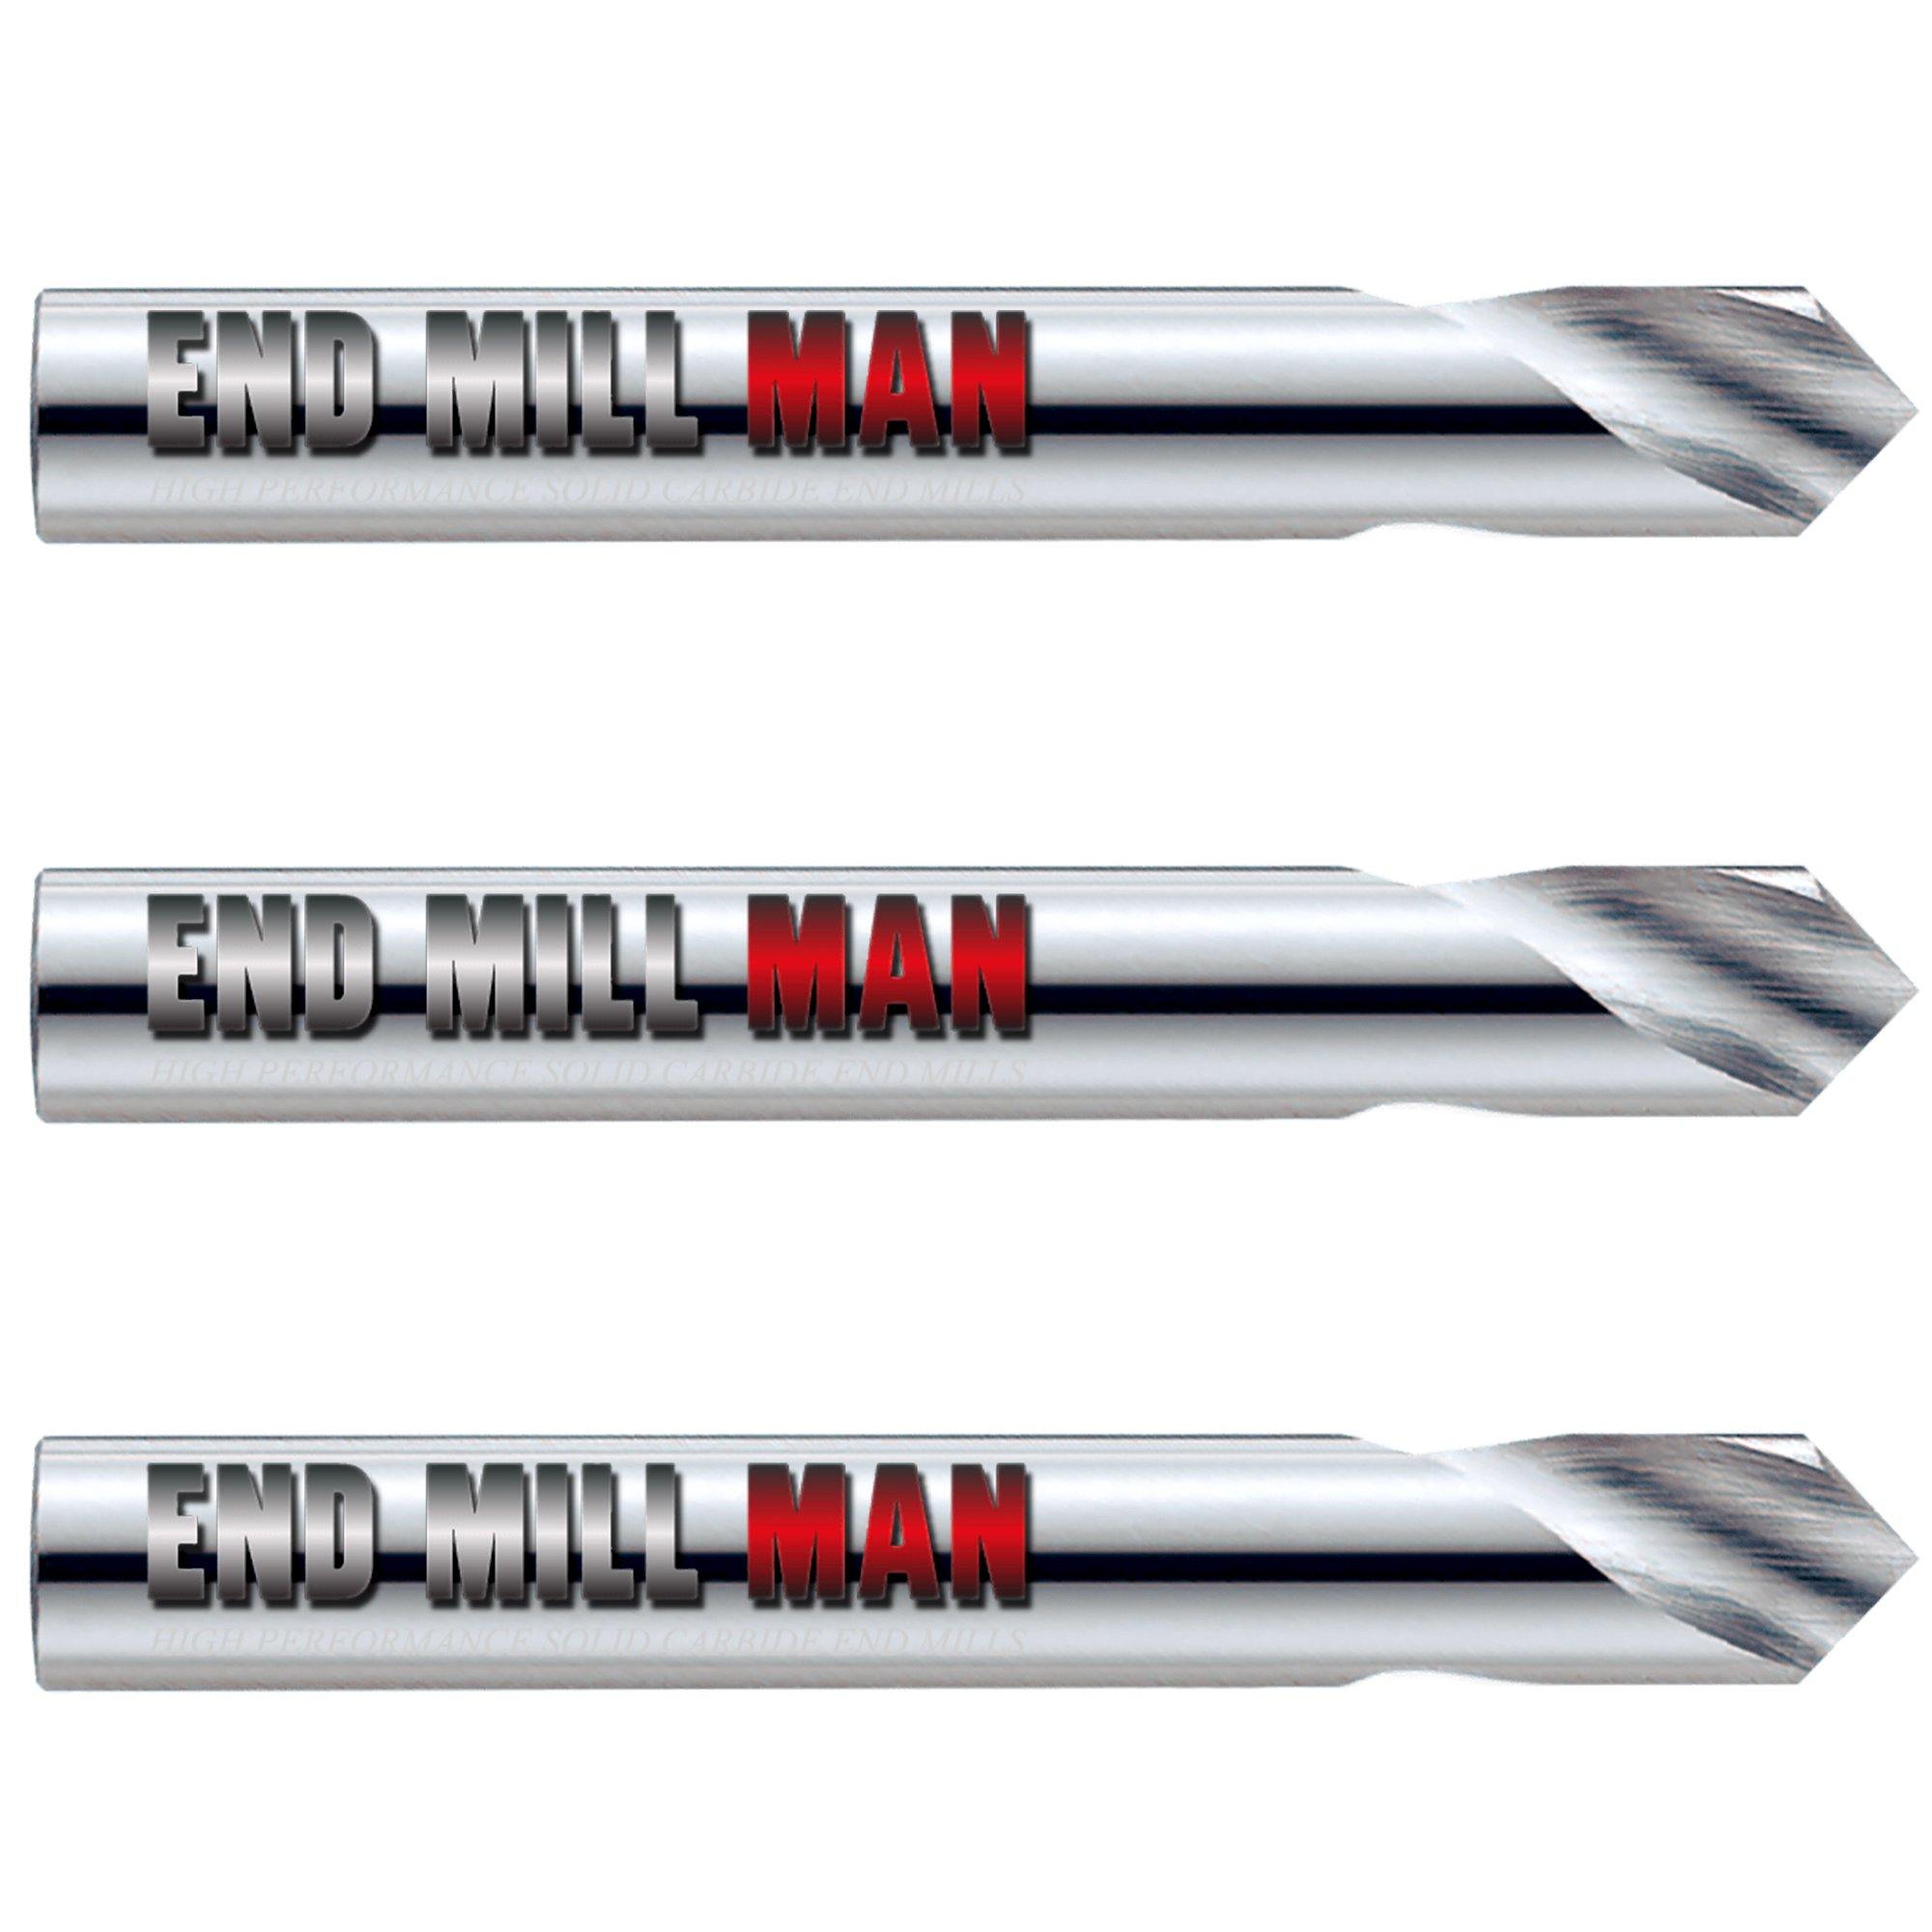 (3 Pack) 5/8" x 2" x 6" Carbide Spotting Drills - The End Mill Store 